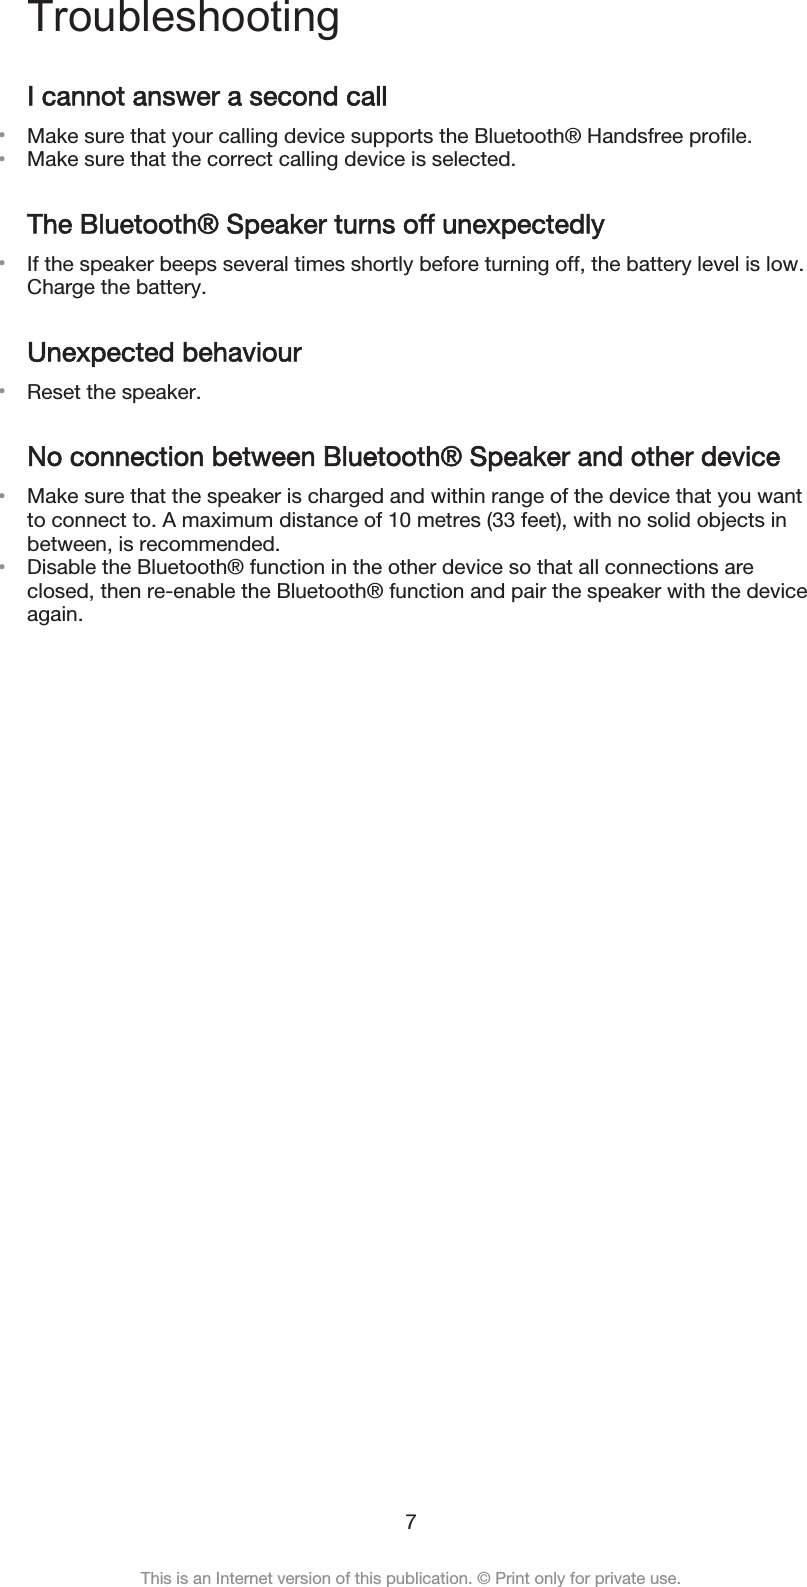 TroubleshootingI cannot answer a second call•Make sure that your calling device supports the Bluetooth® Handsfree profile.•Make sure that the correct calling device is selected.The Bluetooth® Speaker turns off unexpectedly•If the speaker beeps several times shortly before turning off, the battery level is low.Charge the battery.Unexpected behaviour•Reset the speaker.No connection between Bluetooth® Speaker and other device•Make sure that the speaker is charged and within range of the device that you wantto connect to. A maximum distance of 10 metres (33 feet), with no solid objects inbetween, is recommended.•Disable the Bluetooth® function in the other device so that all connections areclosed, then re-enable the Bluetooth® function and pair the speaker with the deviceagain.7This is an Internet version of this publication. © Print only for private use.